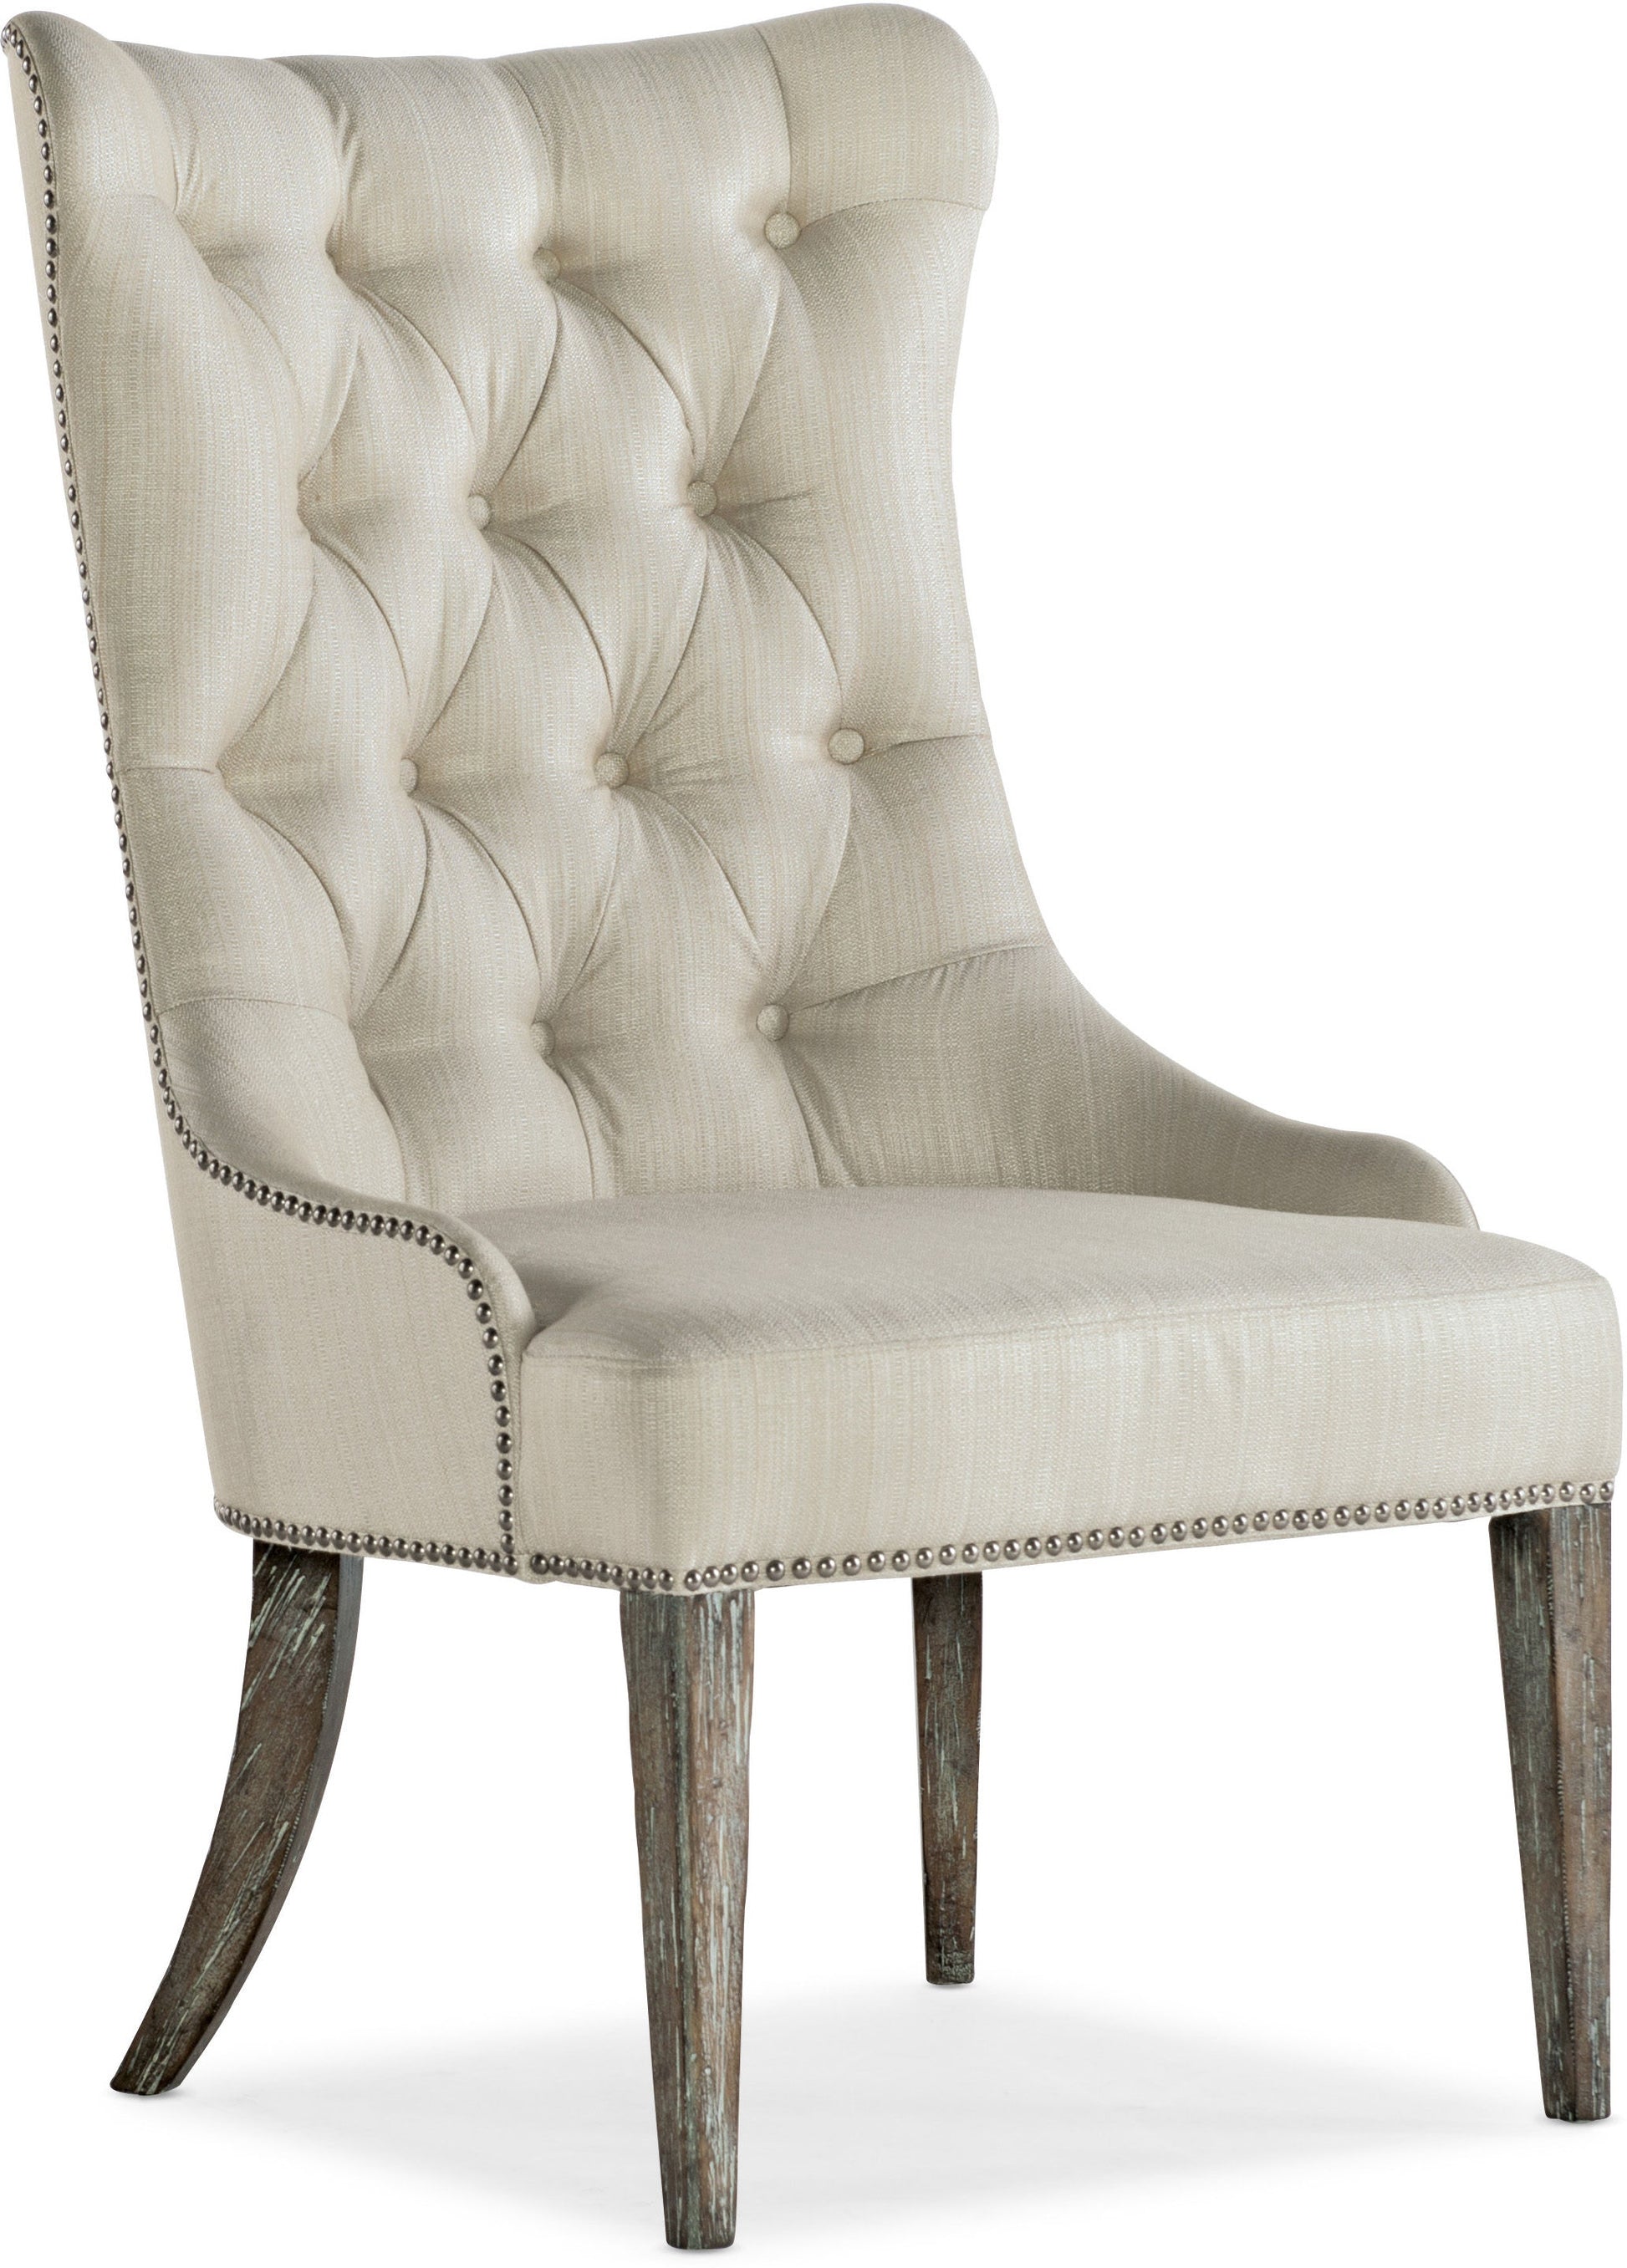 Hooker Furniture Dining Room Sanctuary Hostesse Upholstered Chair - 2 per carton/price ea - Dreamart Gallery